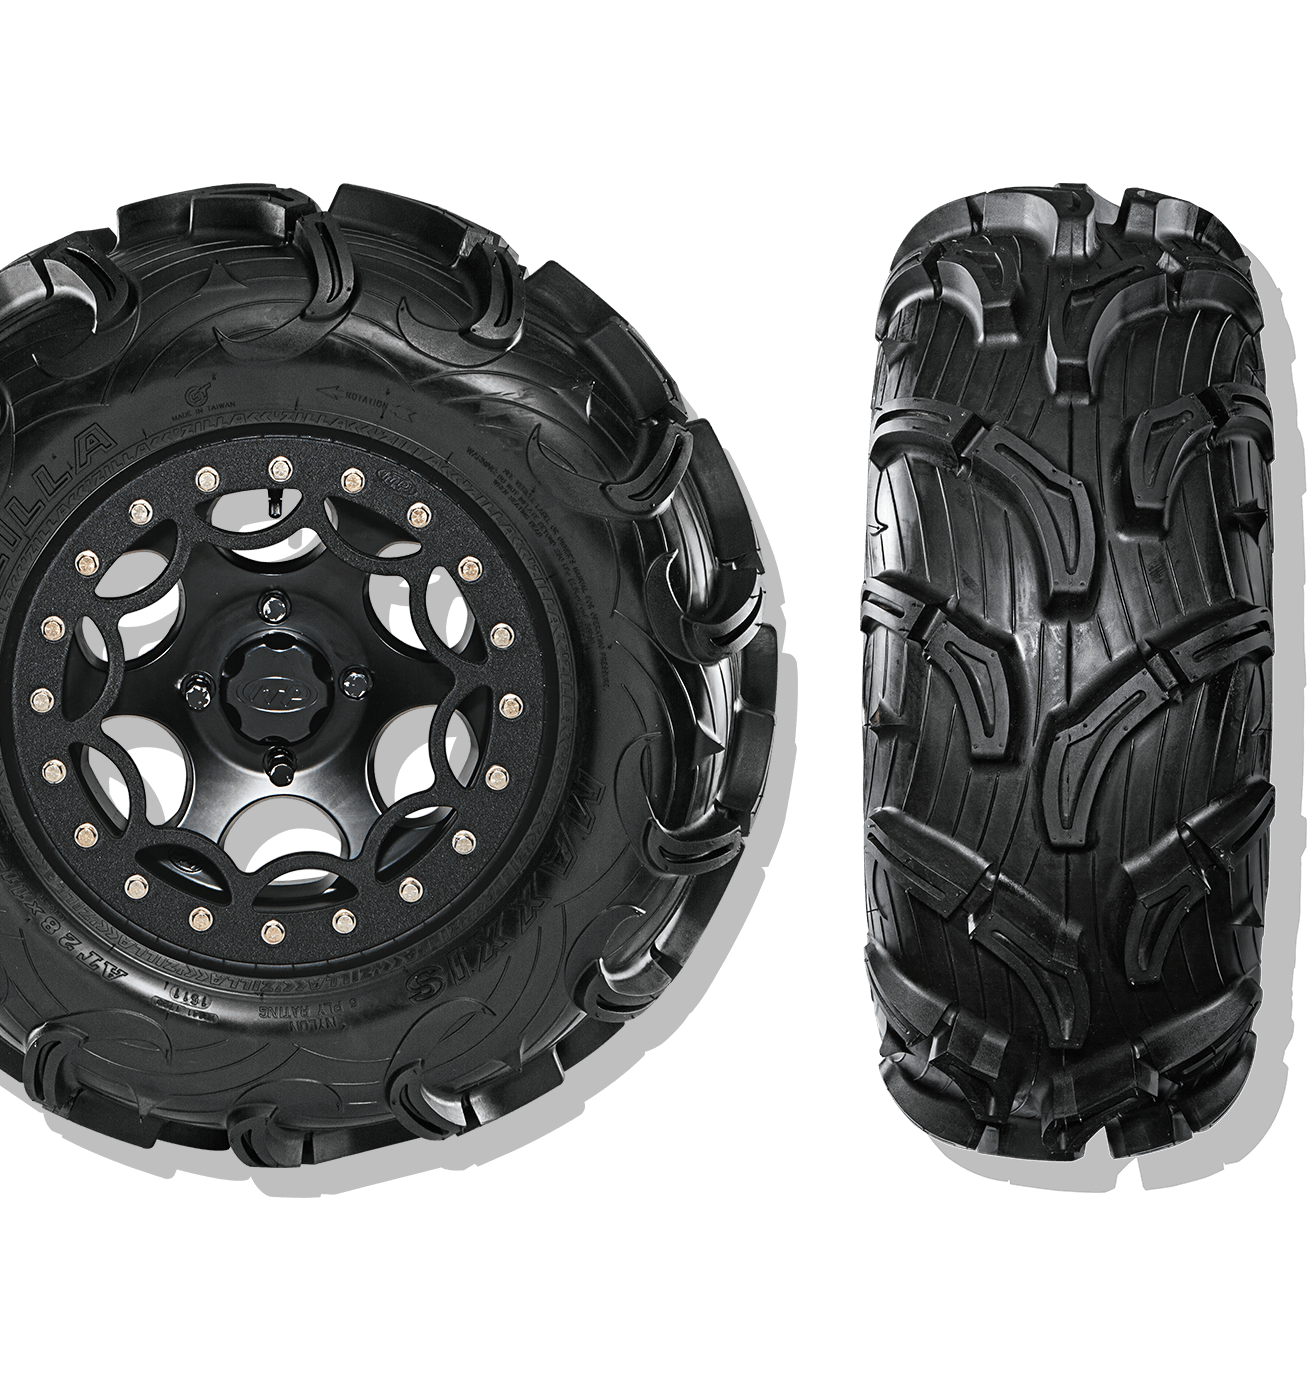 28-Inch-Maxxis-Zilla-Tires-with-Aluminum-Beadlock-Wheels-General-Competition-ATV.png